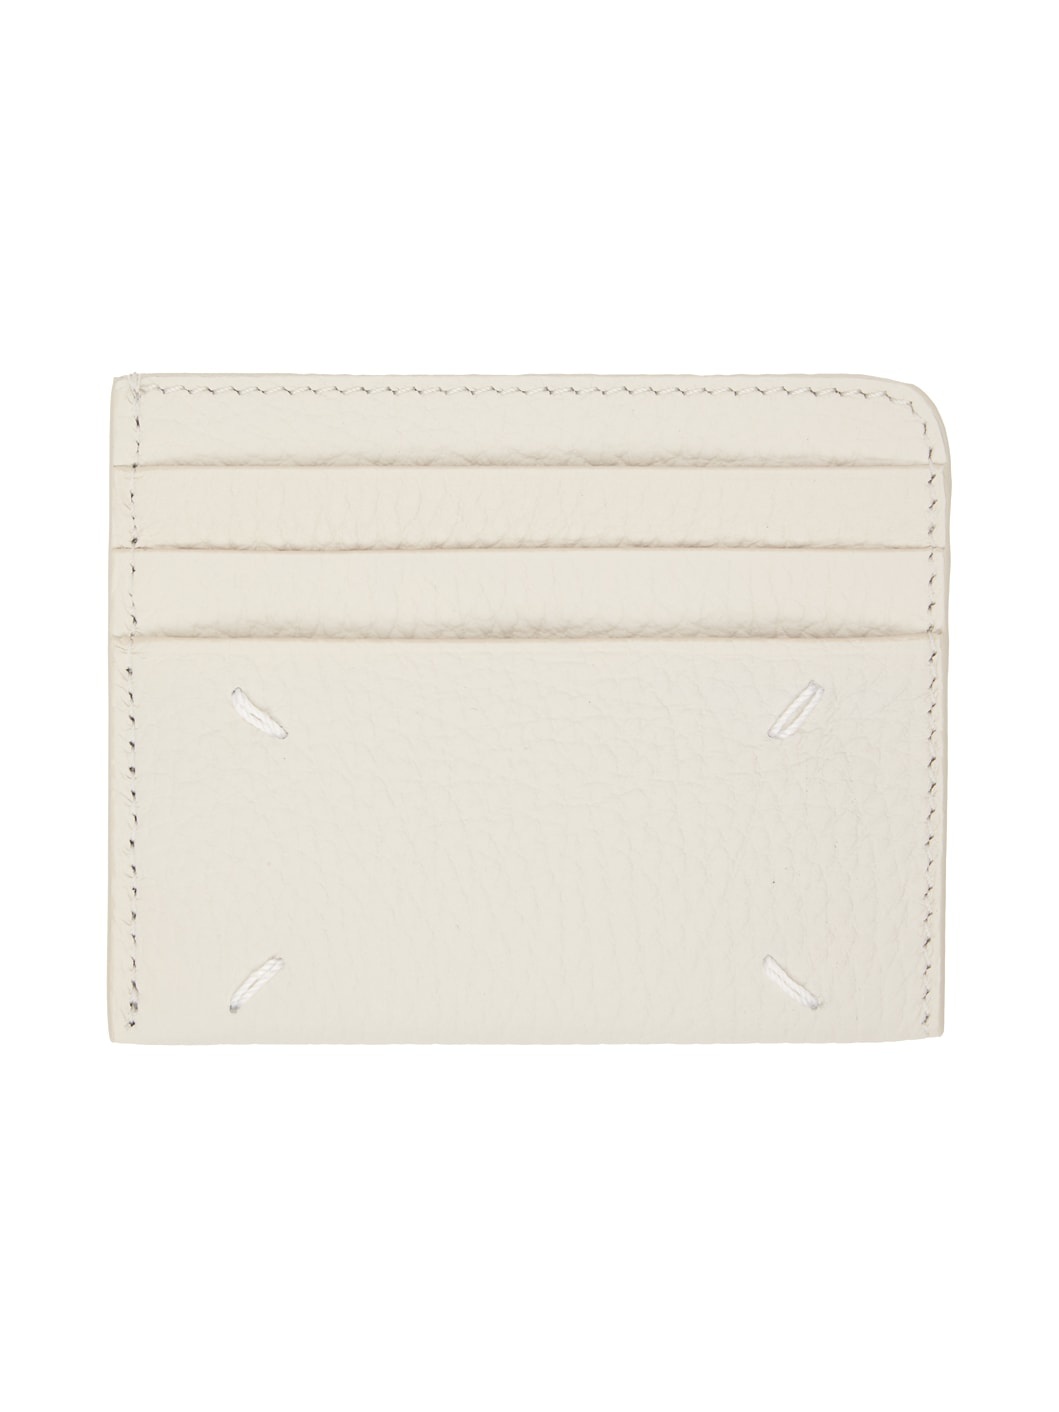 Off-White Grained Card Holder - 1